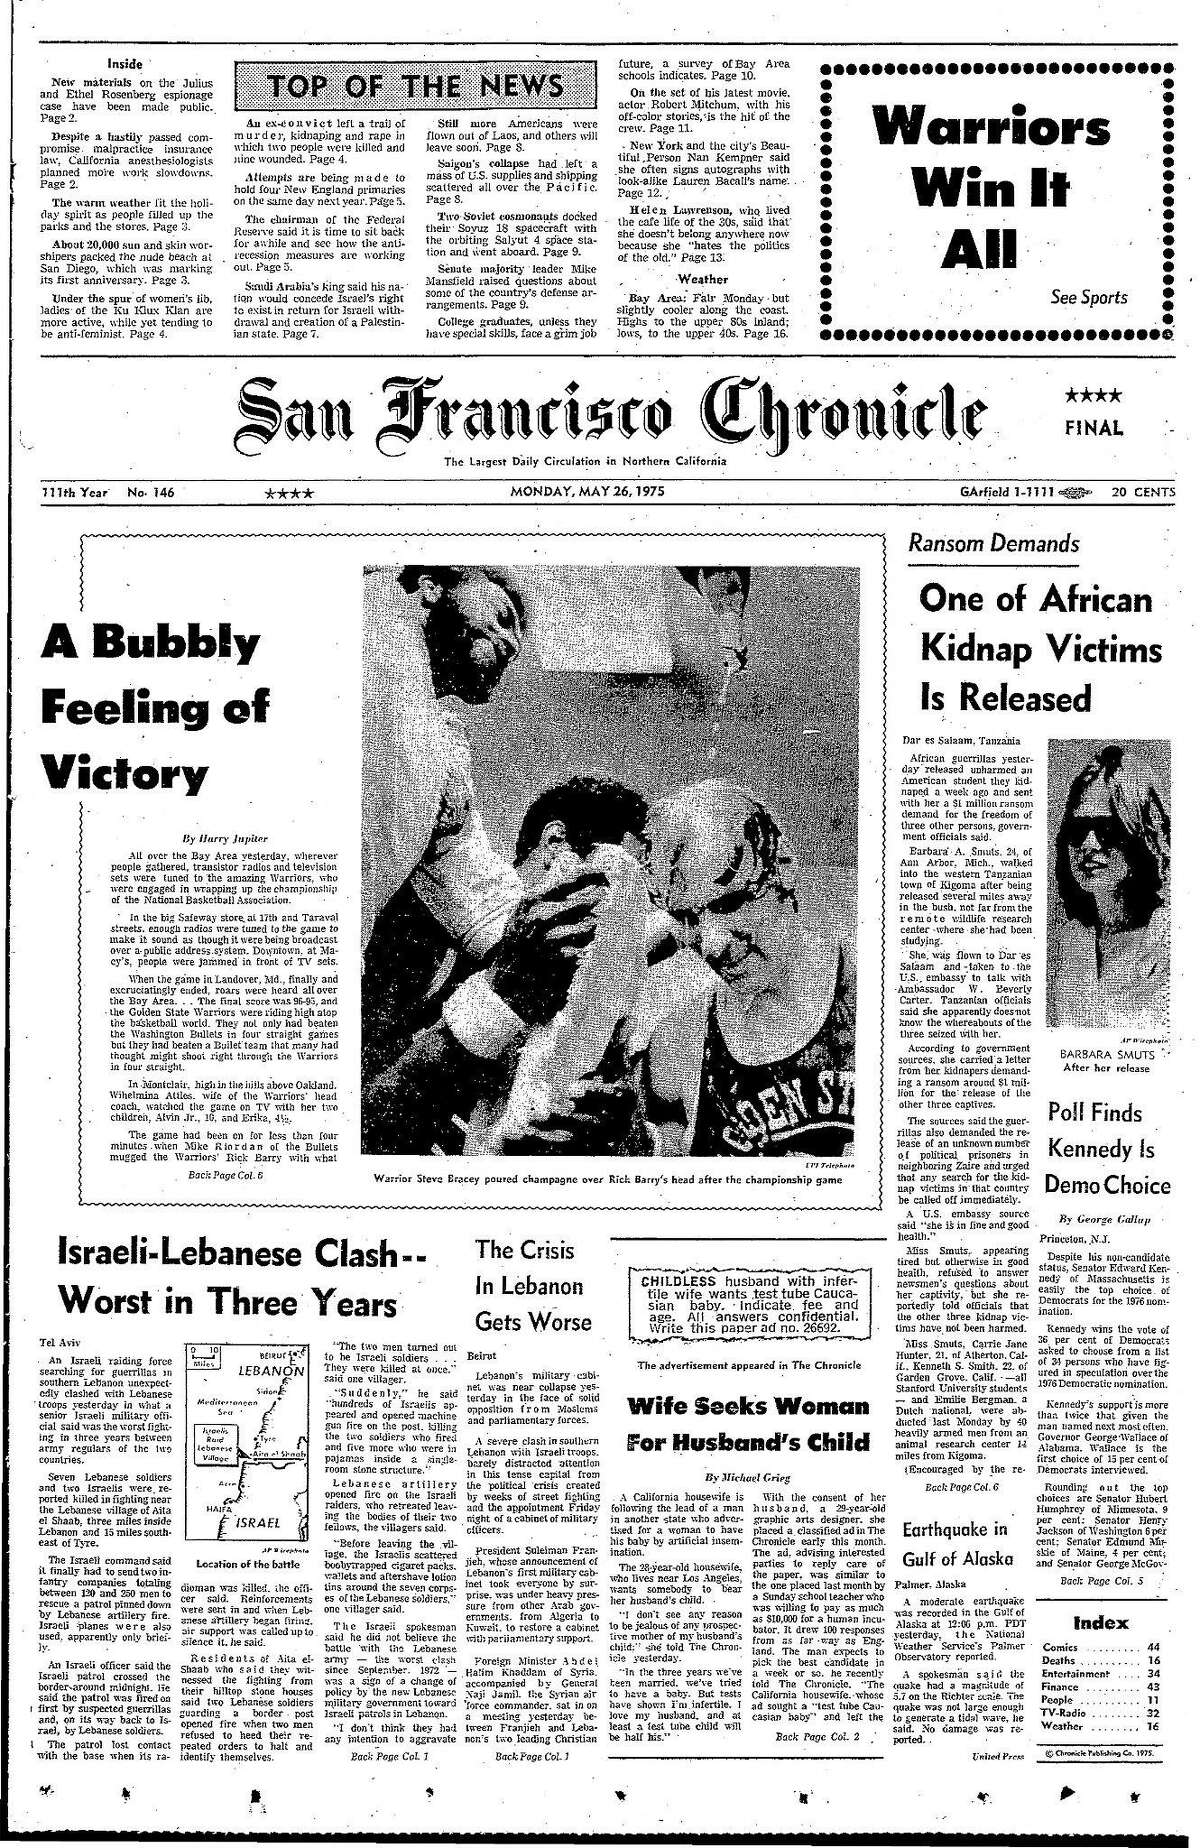 Historic Chronicle Front Page May 26, 1975 Golden State Warriors win the NBA championship Chron365, Chroncover